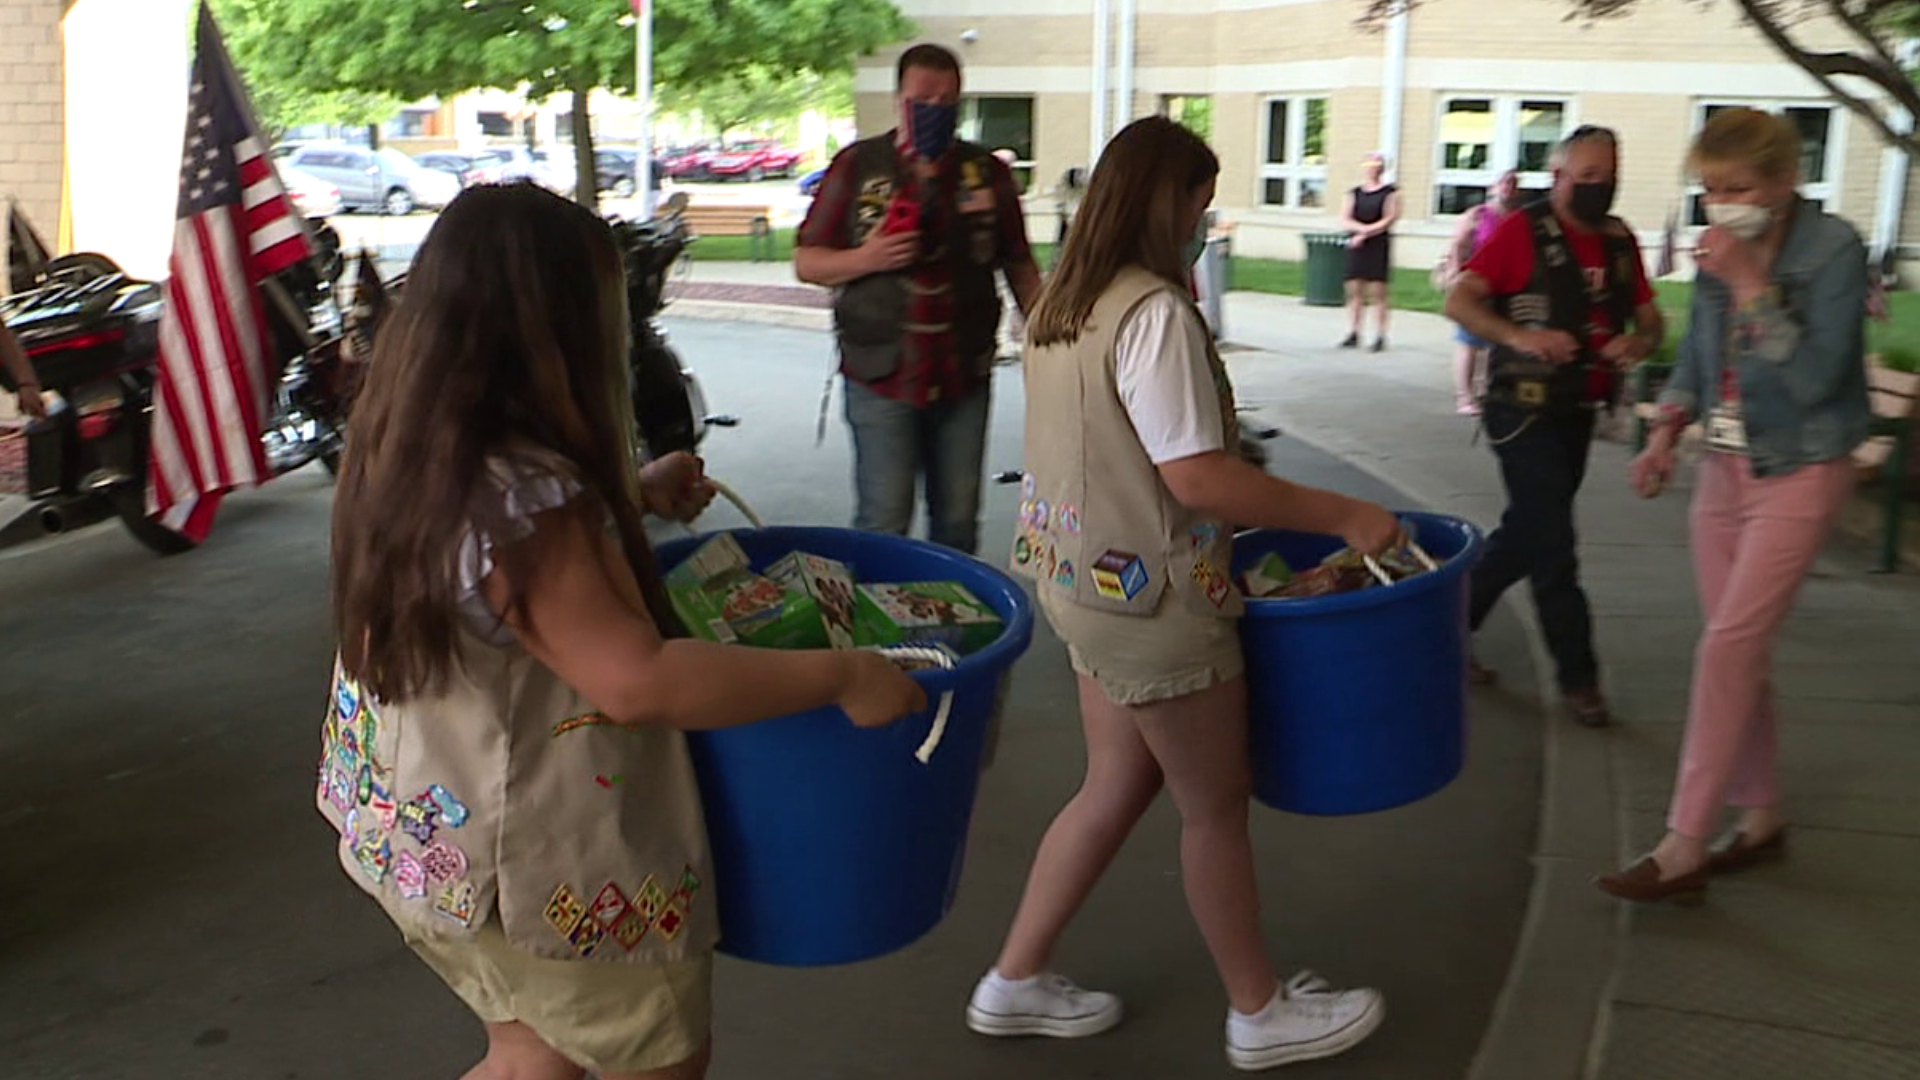 Troop leaders say it was their way of giving back to the veterans for their service.